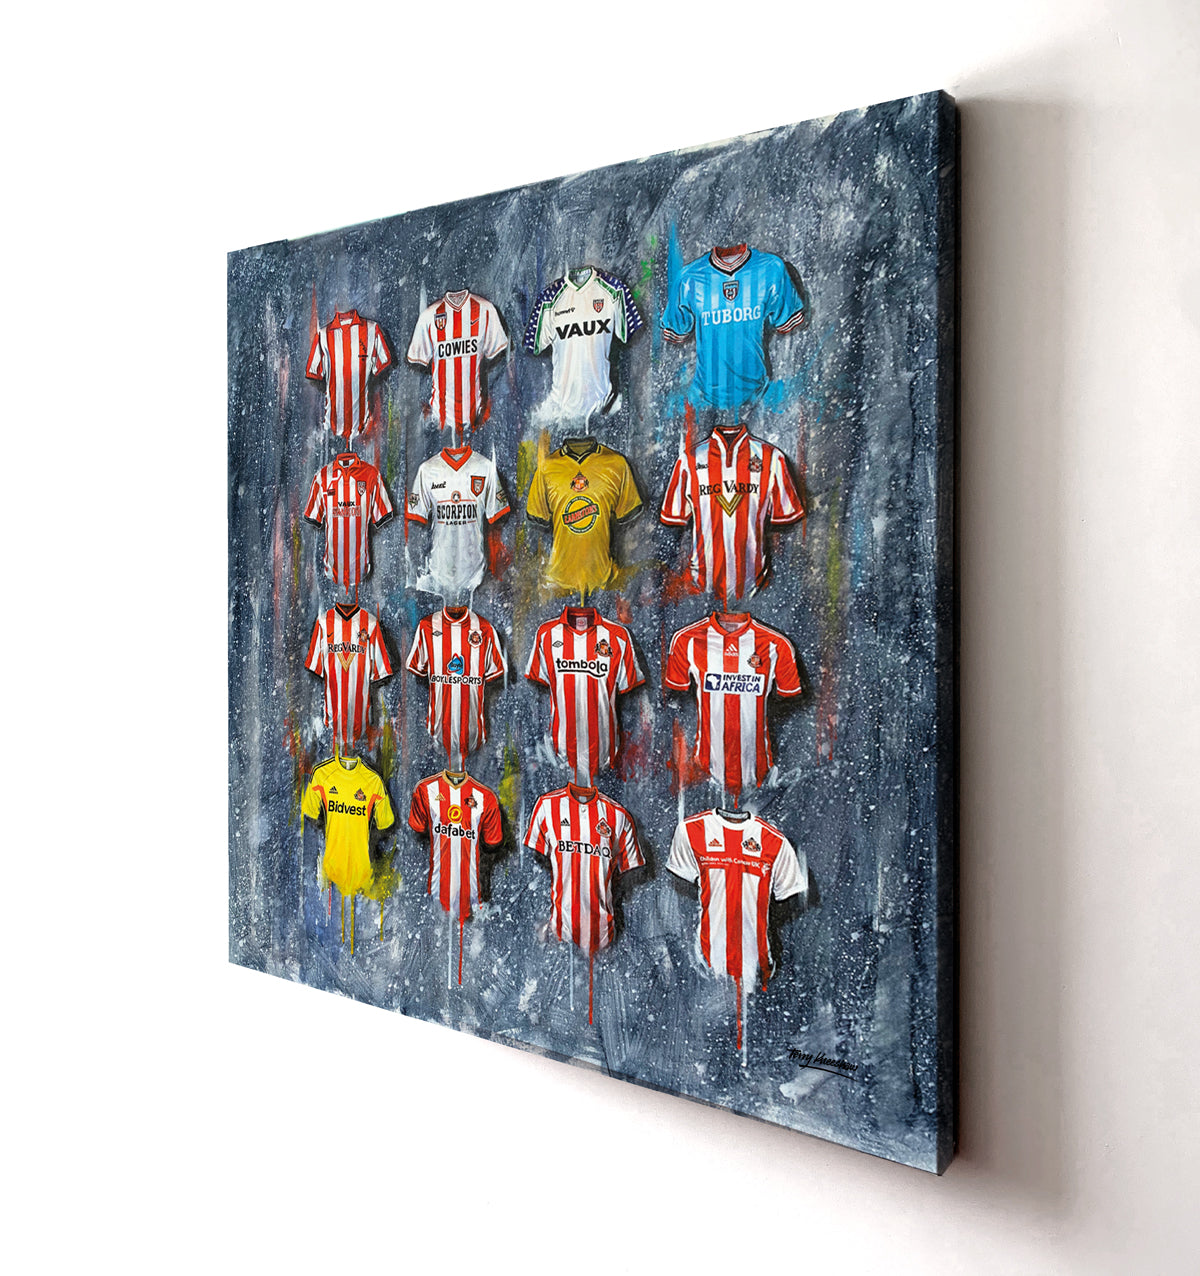 Transform any wall into a Sunderland fan zone with these stunning canvases from Terry Kneeshaw. These canvases feature various artwork of the Sunderland team, and come in various sizes: 20x20, 30x30, or 40x40, and in either a framed or unframed black floating frame. Whether you are looking to decorate your home, office, or man cave, these canvases are perfect for any Sunderland fan looking to show their support for the team.